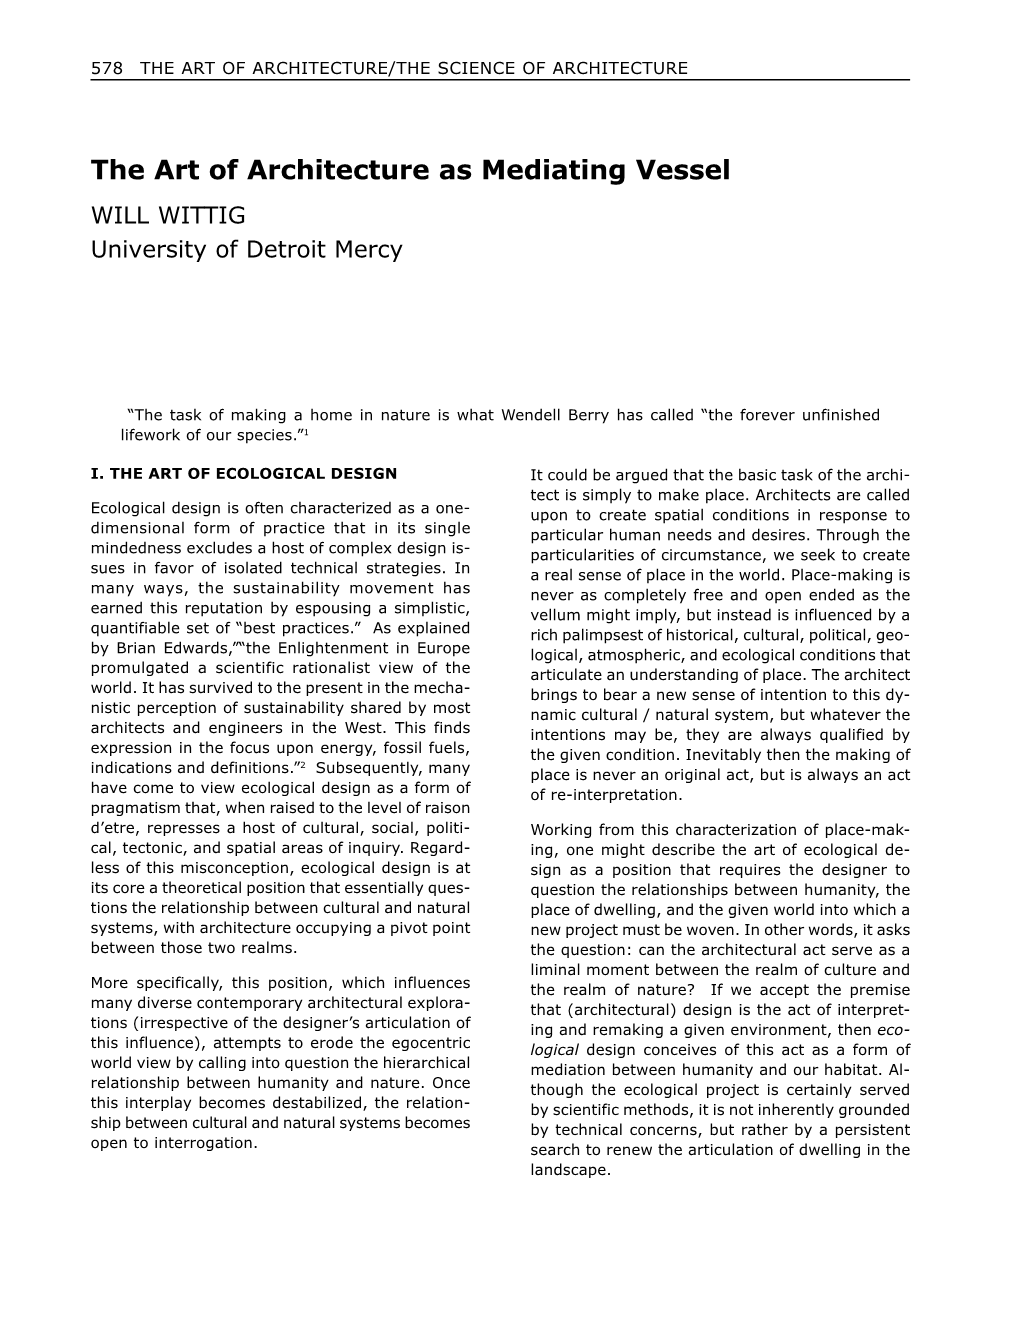 The Art of Architecture As Mediating Vessel WILL WITTIG University of Detroit Mercy